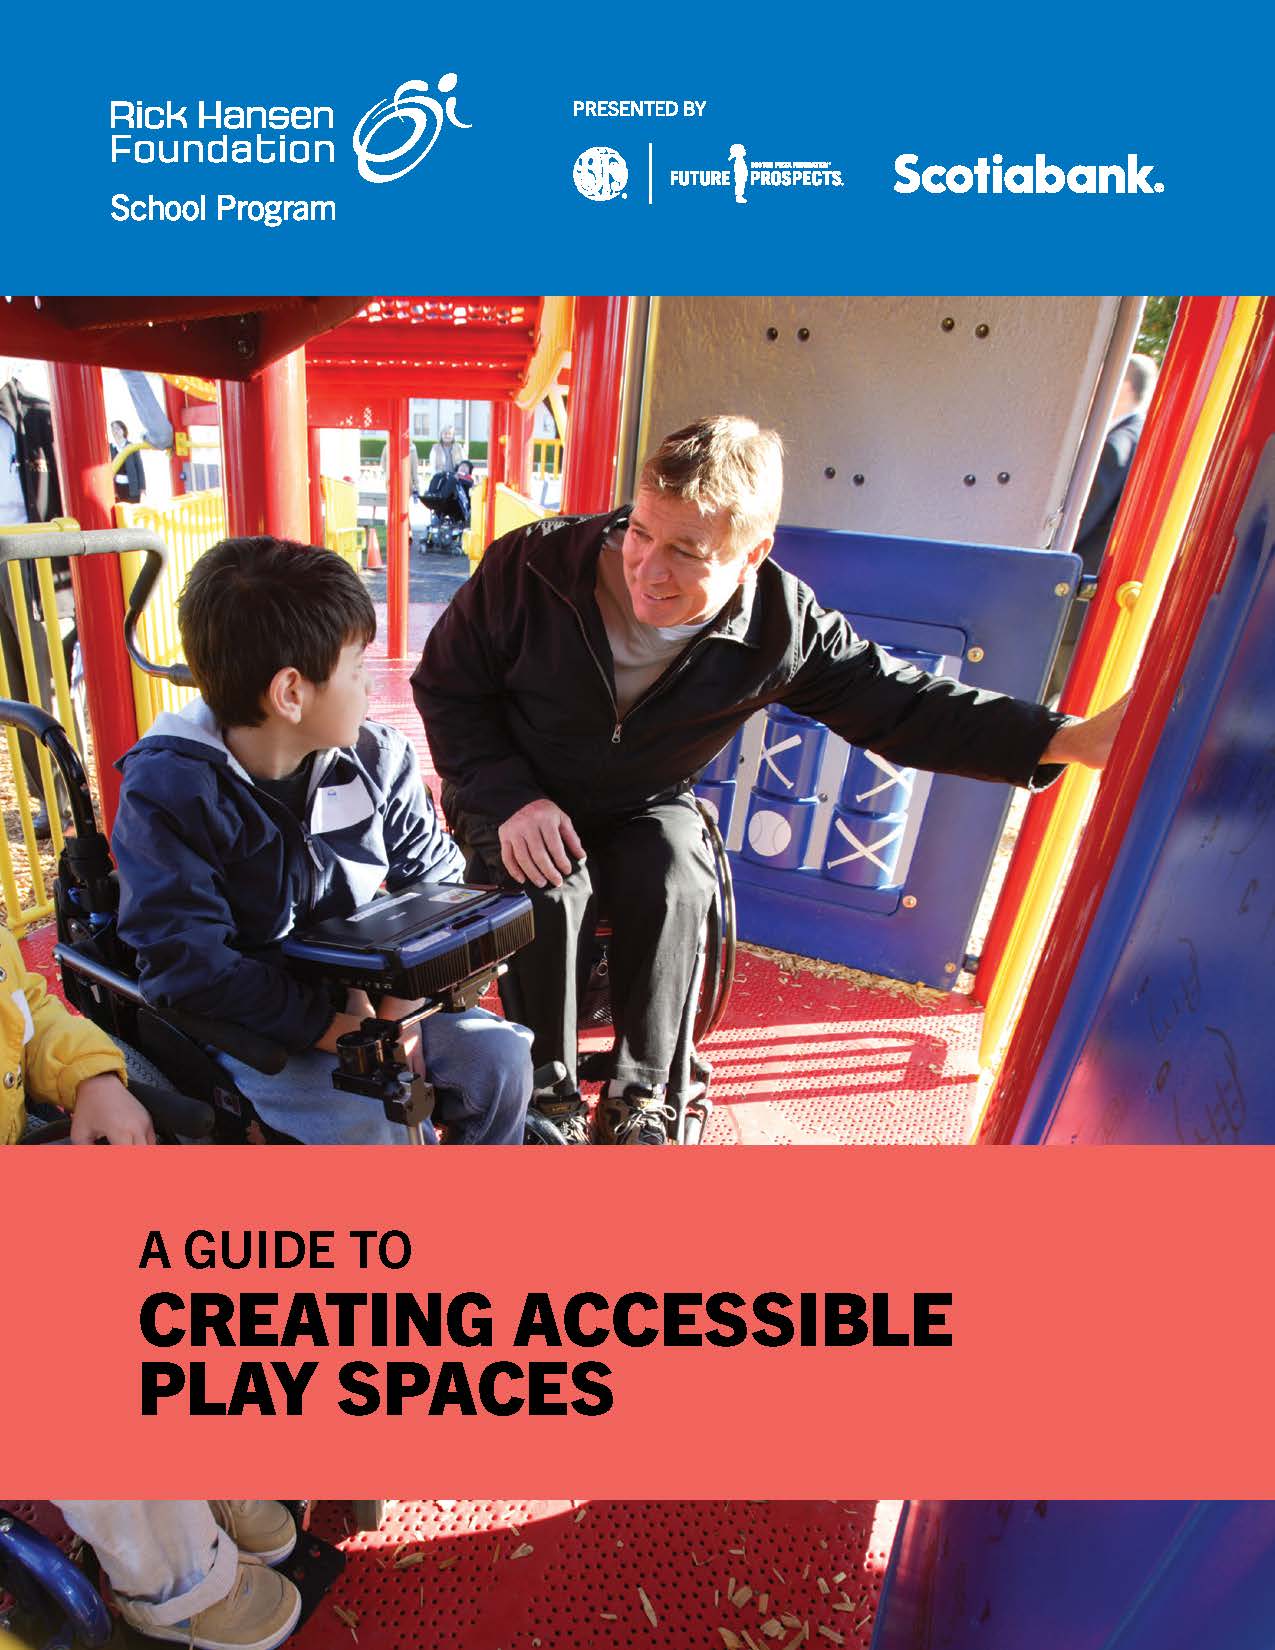 Rick Hansen Foundation Guide to Creating Accessible Play Spaces